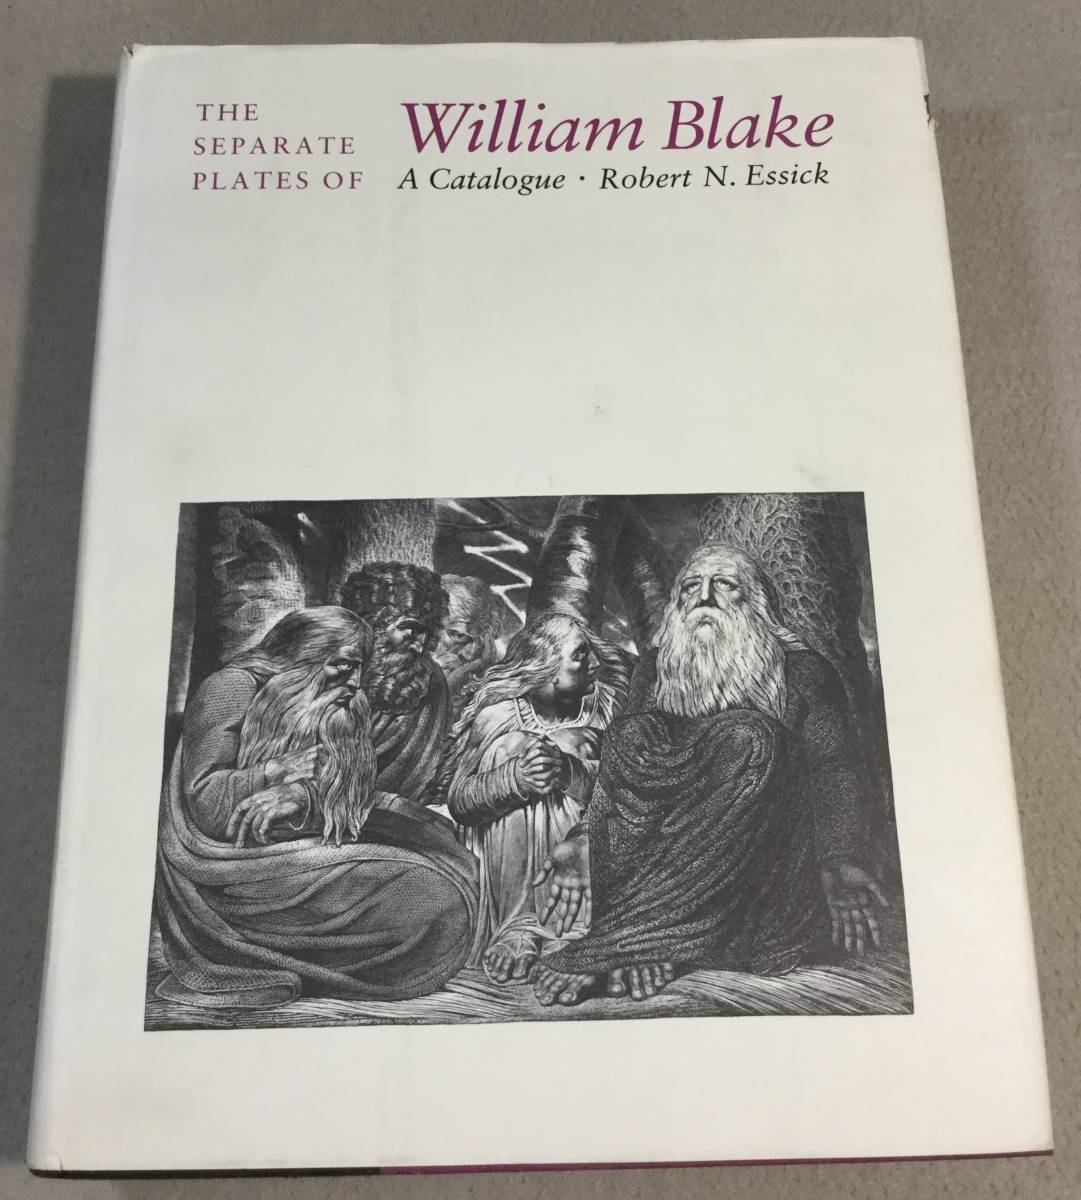 ykbd/23/0405/p80/A/10★洋書 The Separate Plates of William Blake A Catalogue ウィリアム・ブレイク